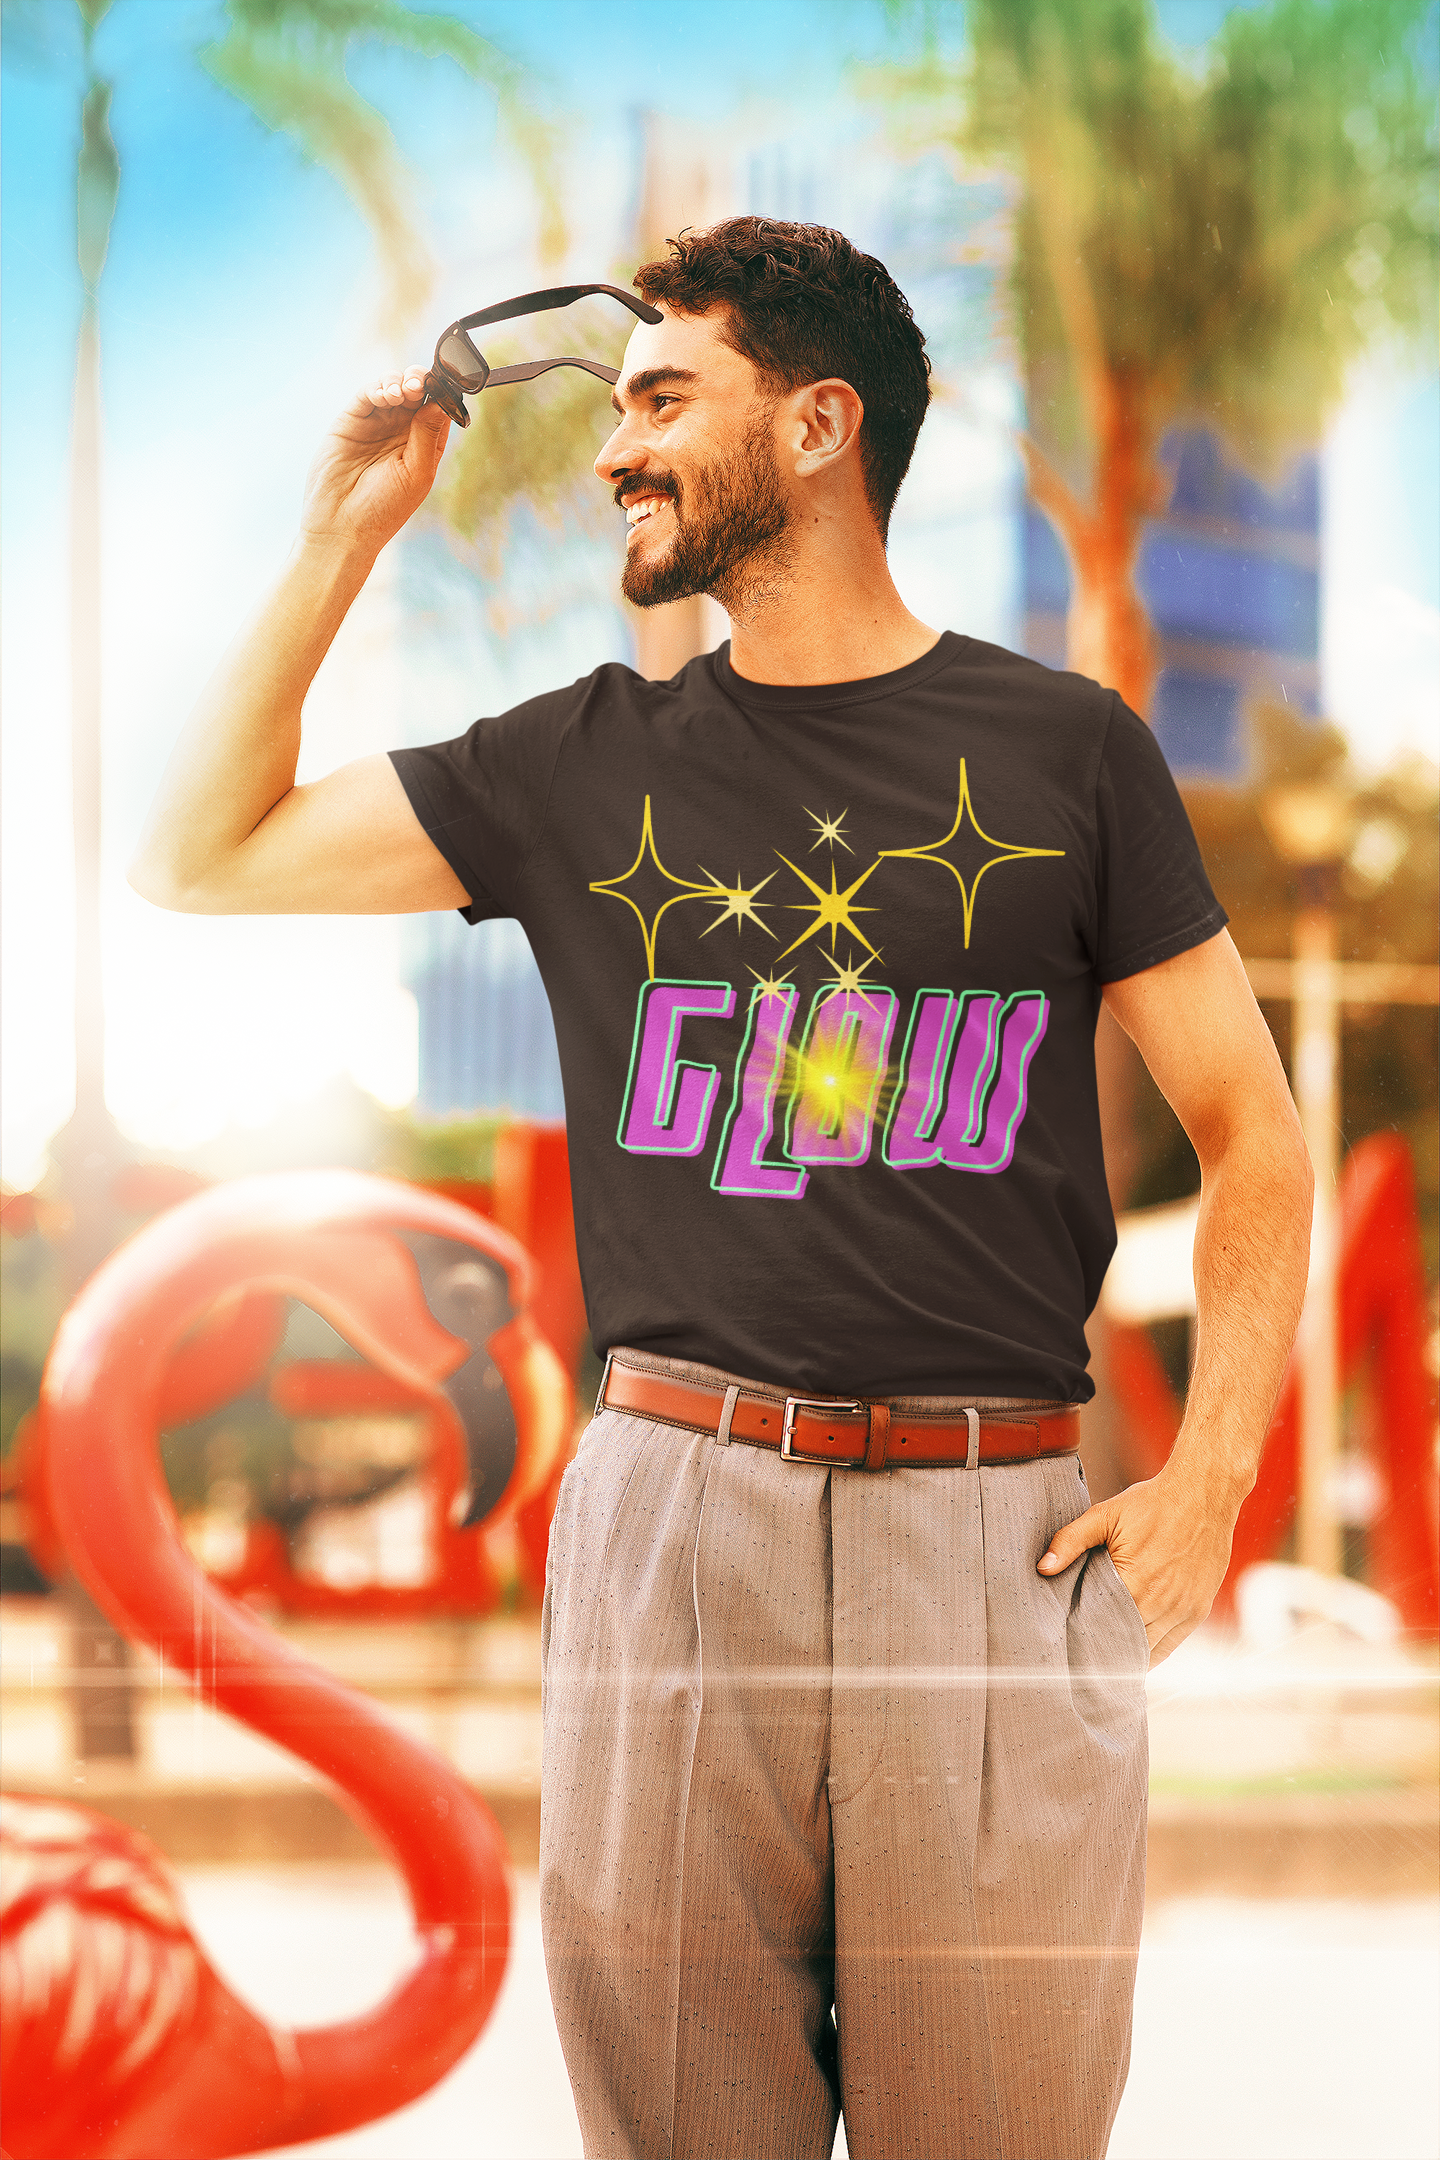 Show Your GLOW Short Sleeve Unisex Softstyle Tee